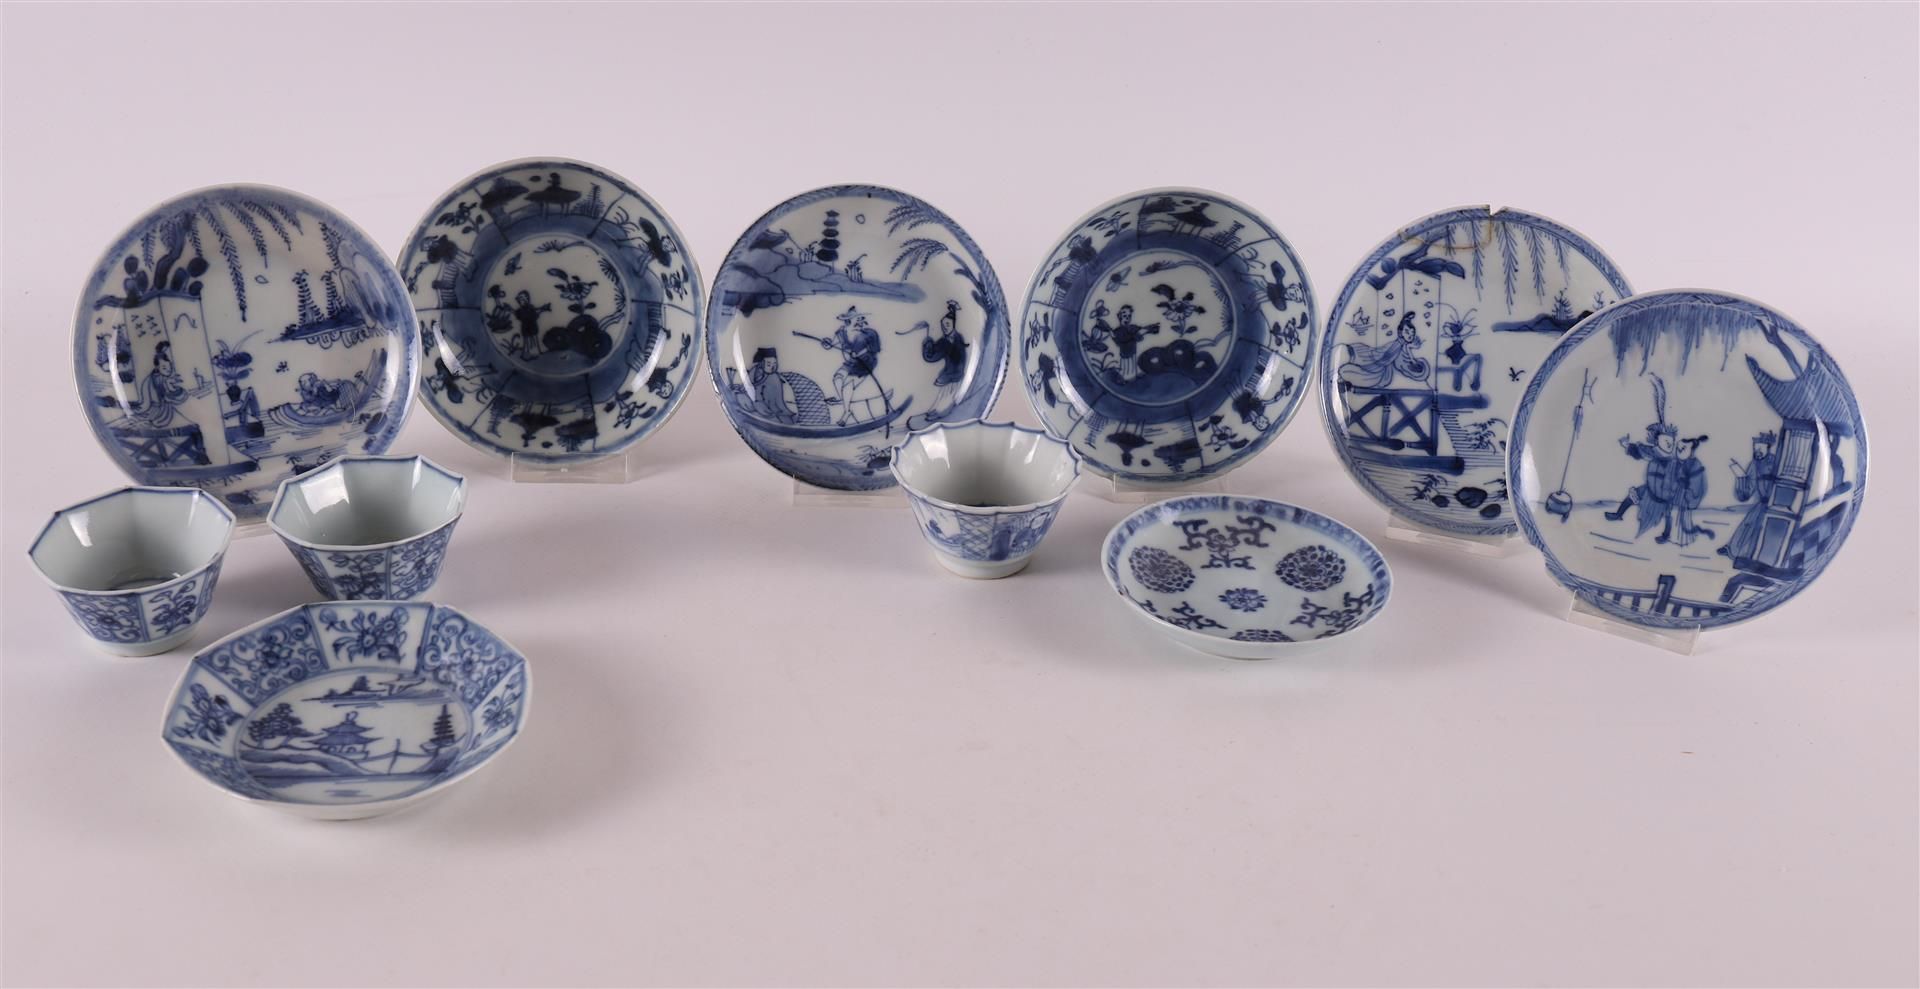 Three blue and white porcelain cups and eight saucers, China, 18th century. blue underglaze